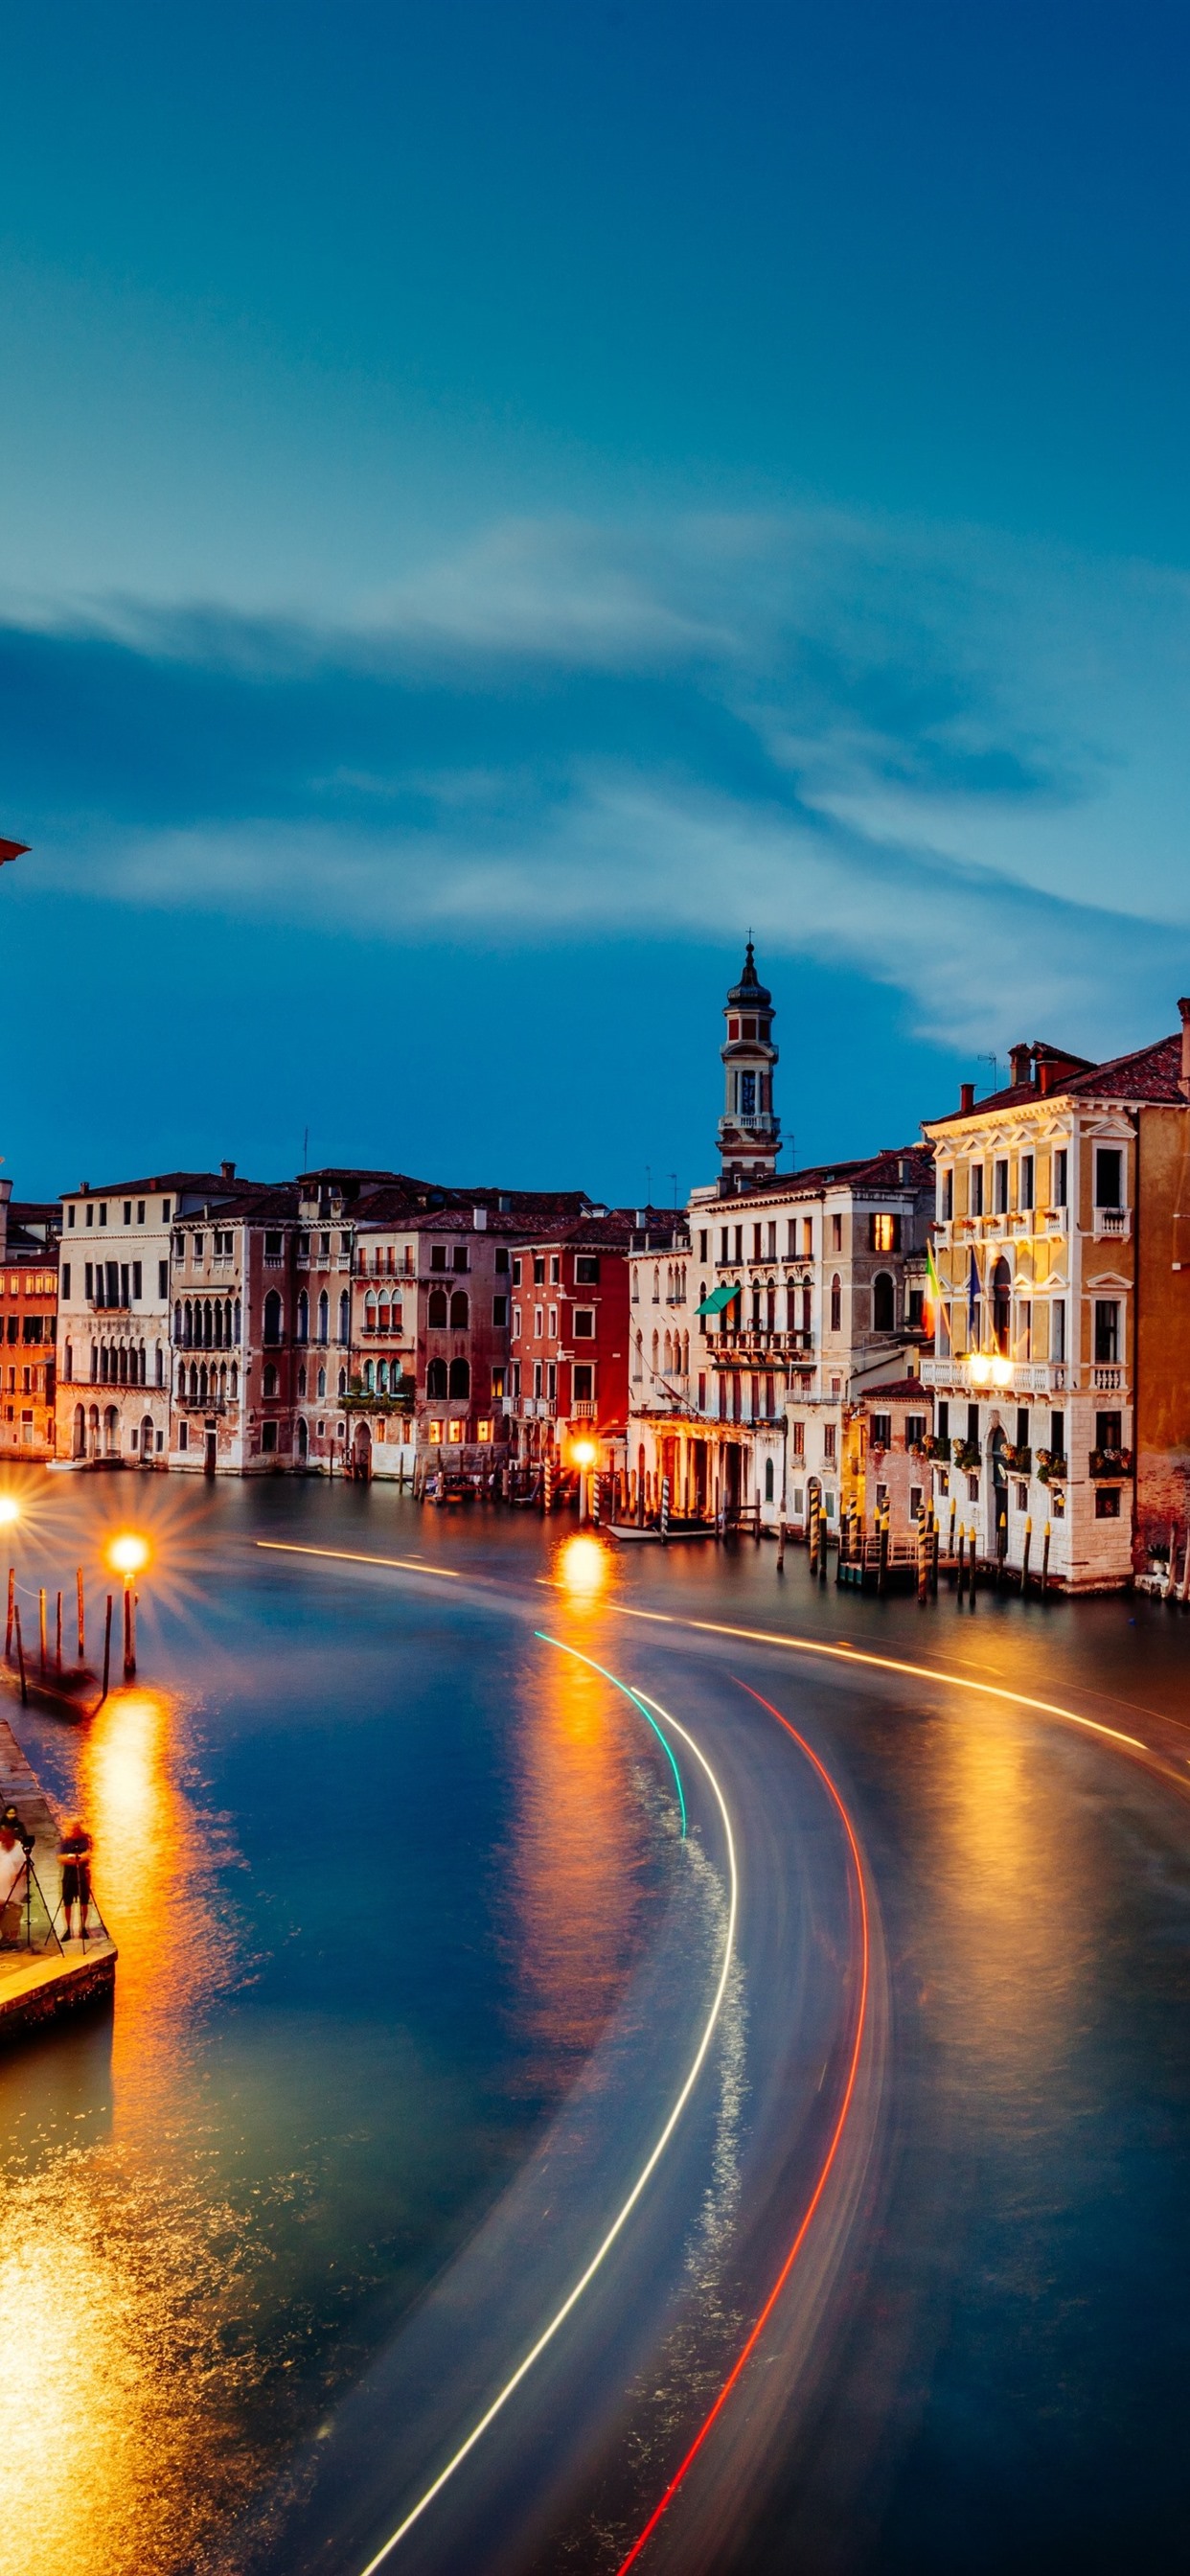 Night Venice Beautiful Italy Wallpaper Gallery Best Fun For All